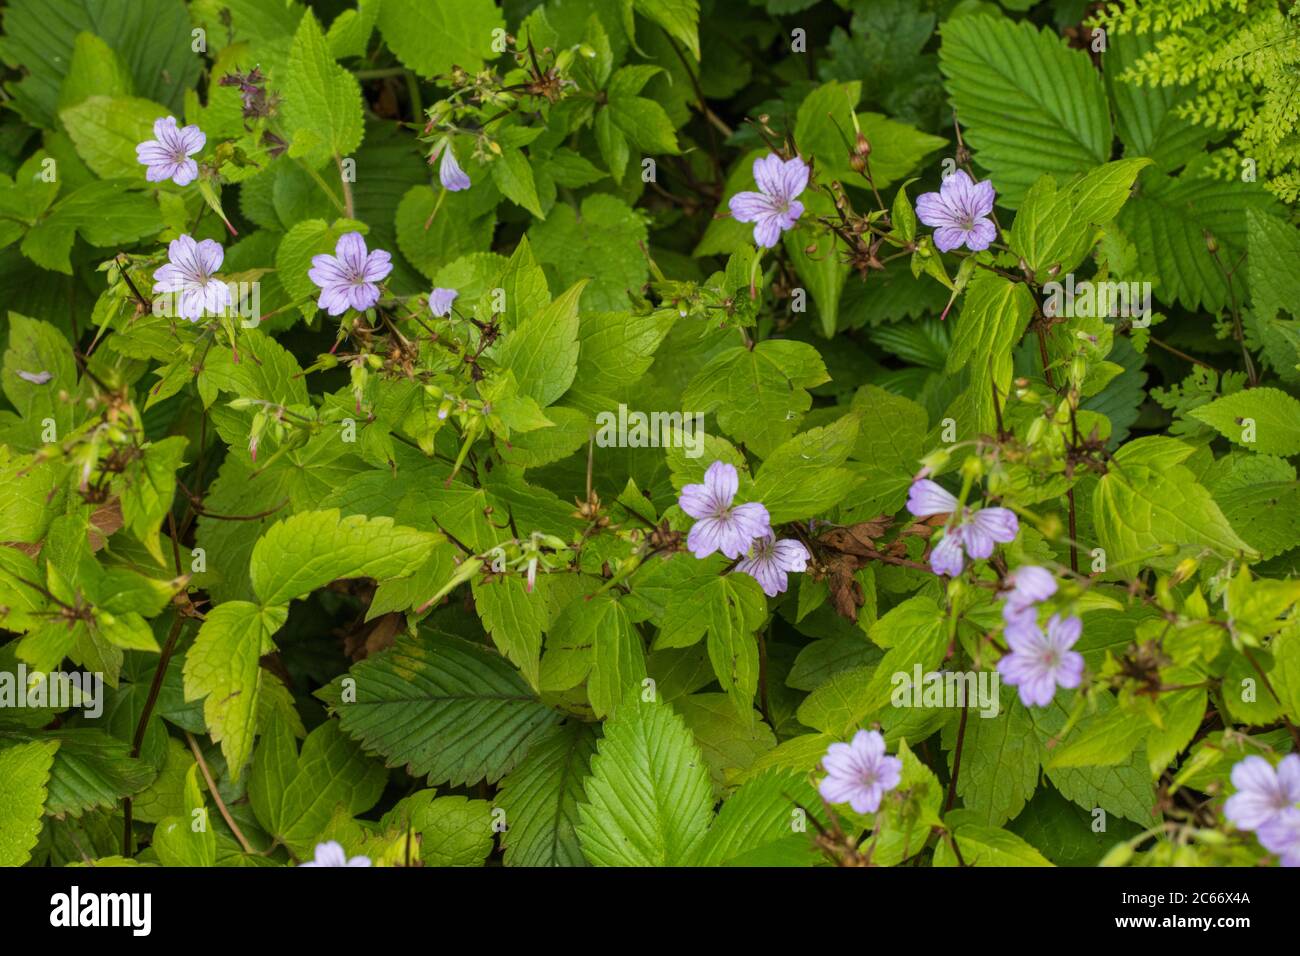 Kontted Crane's-bill flowers Stock Photo